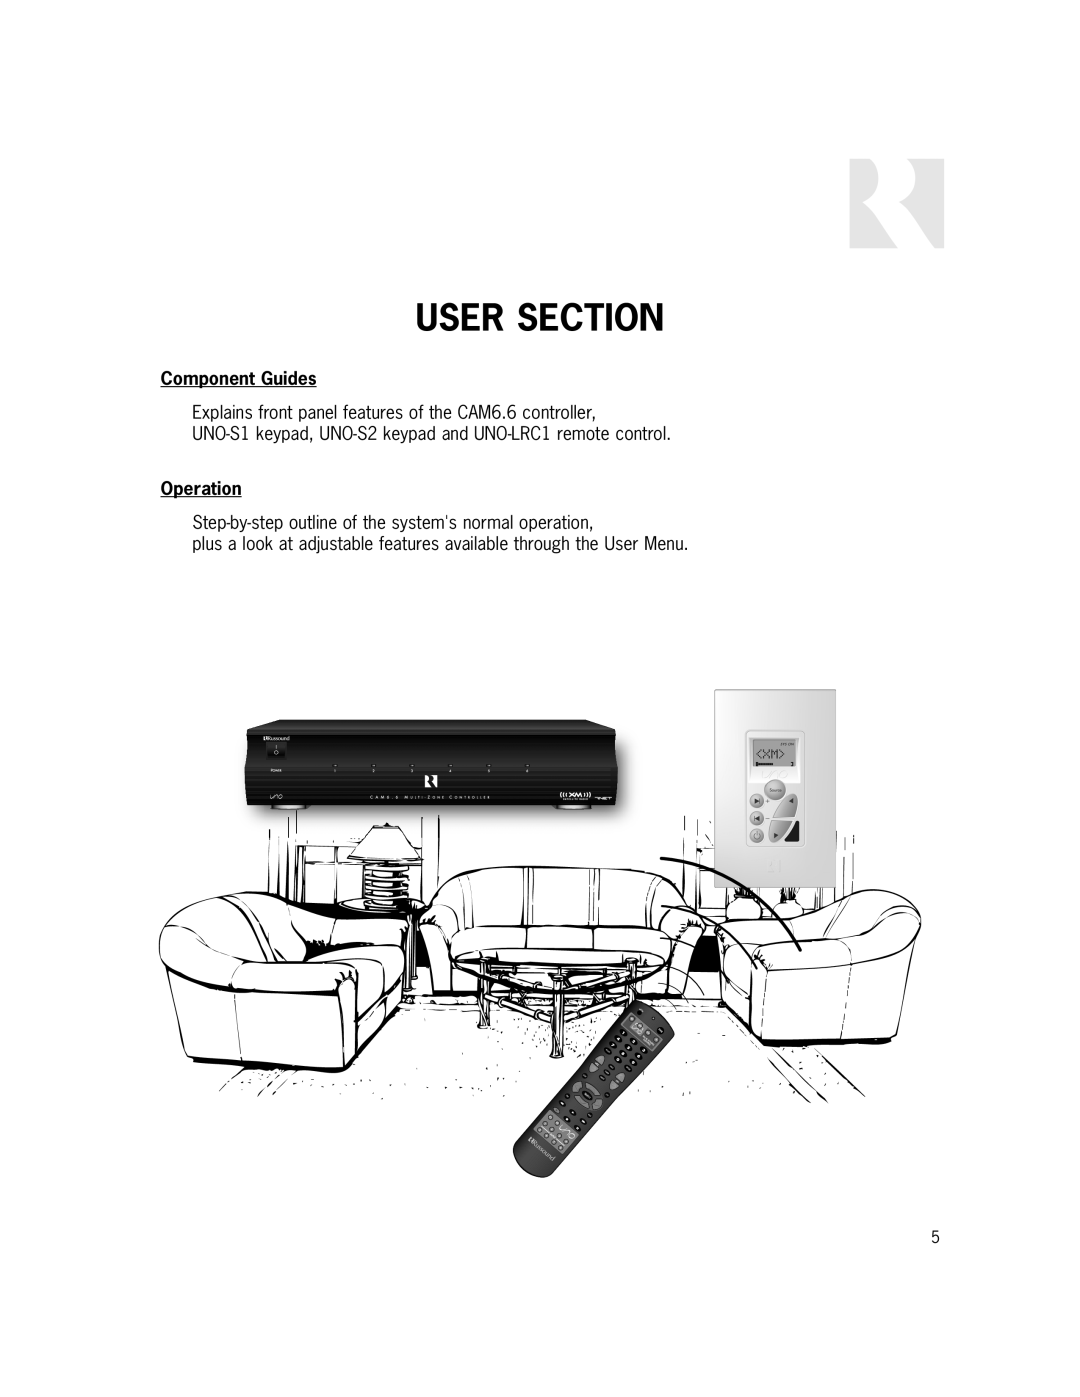 Russound CAM6.6X-S1/S2 instruction manual User Section, Component Guides, Operation 